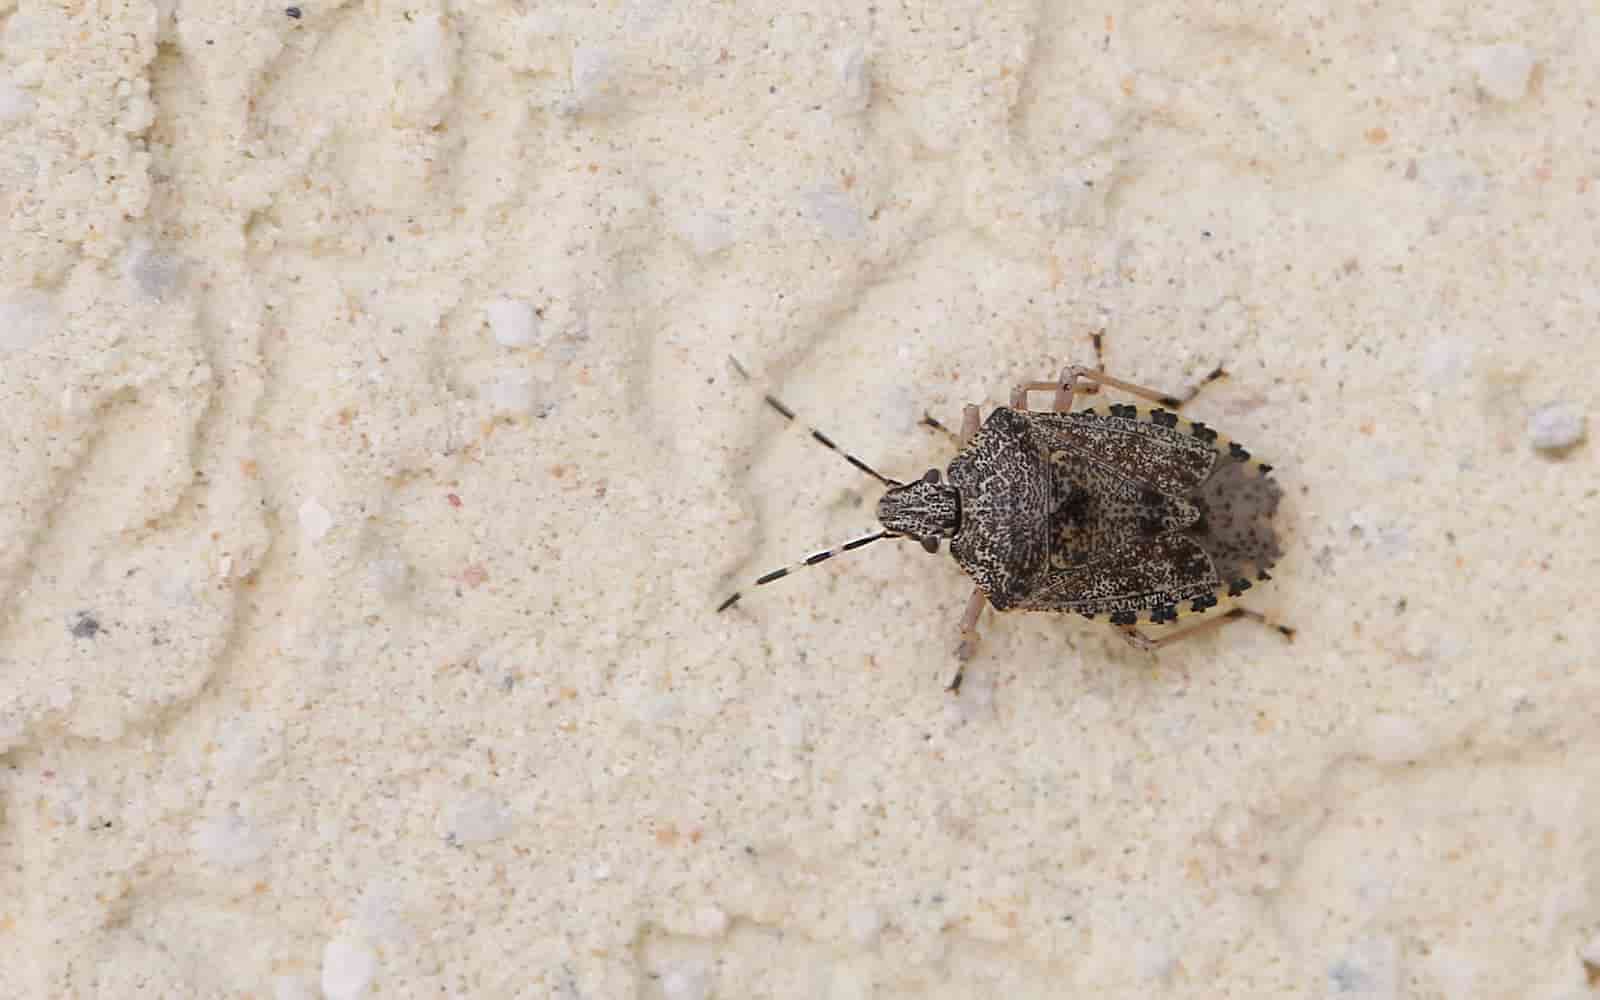 Brown Marmorated Stink bug on a wall